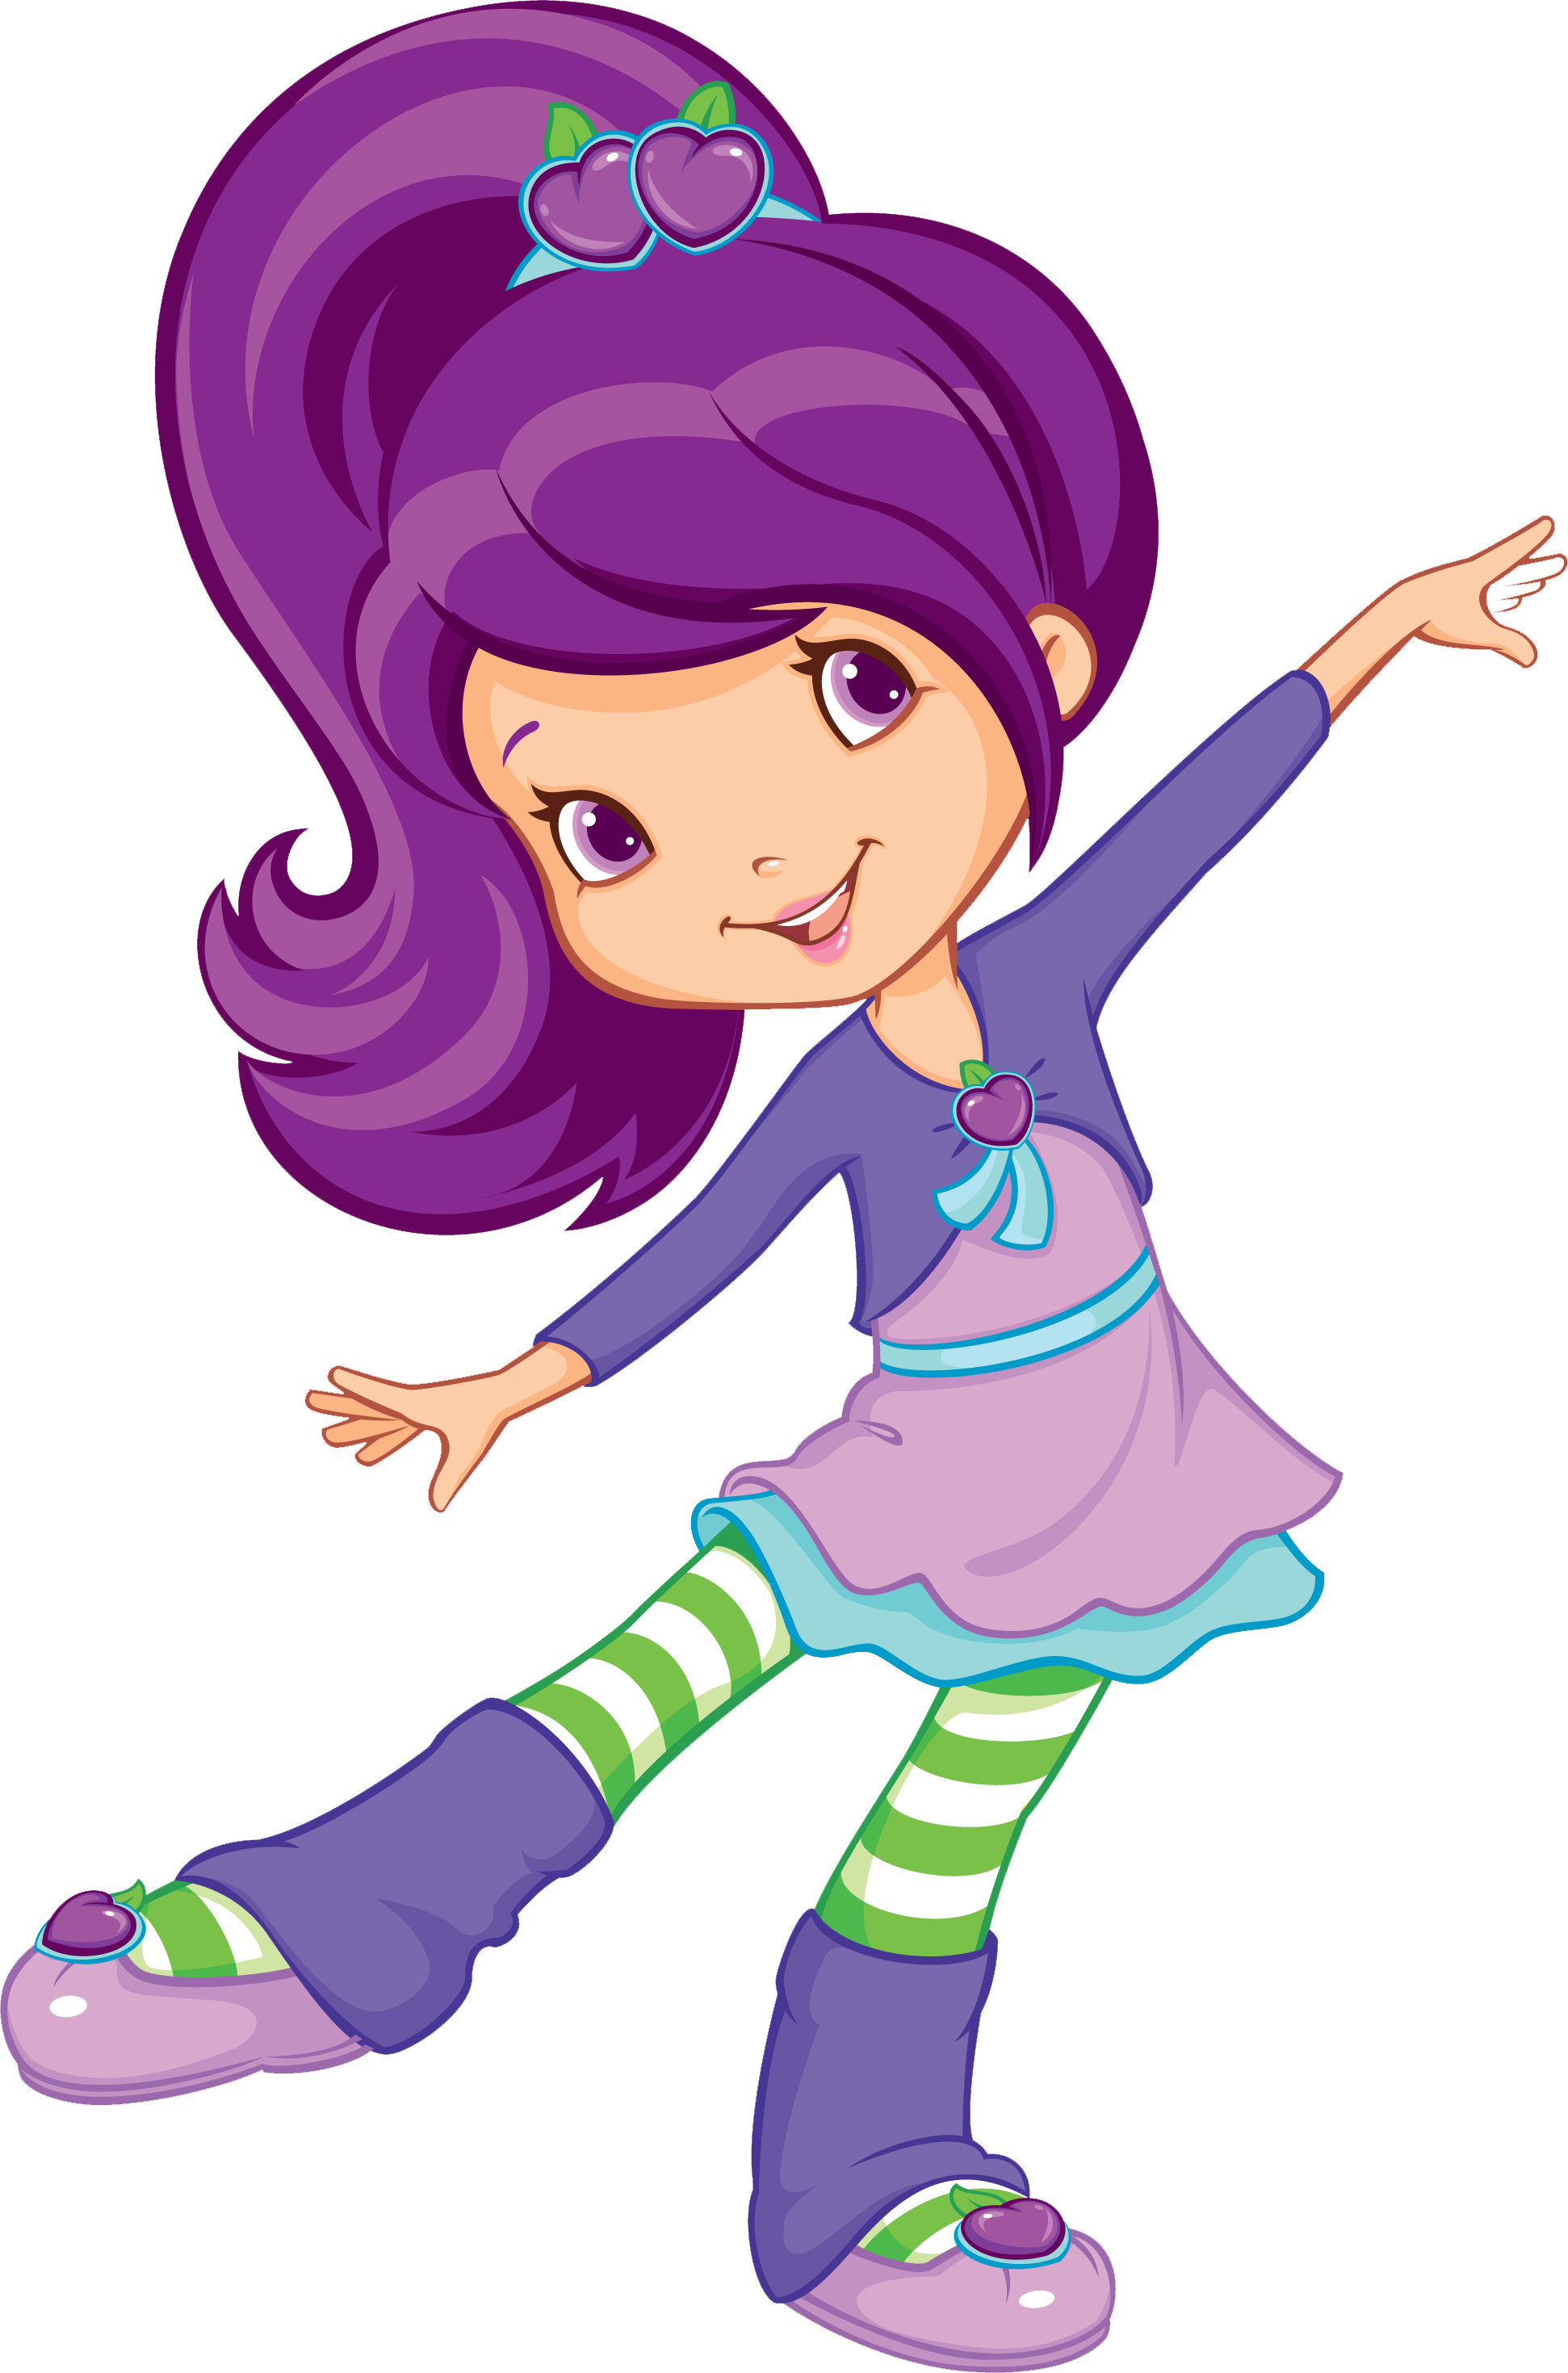 Plum Pudding is a character from Strawberry Shortcake. 